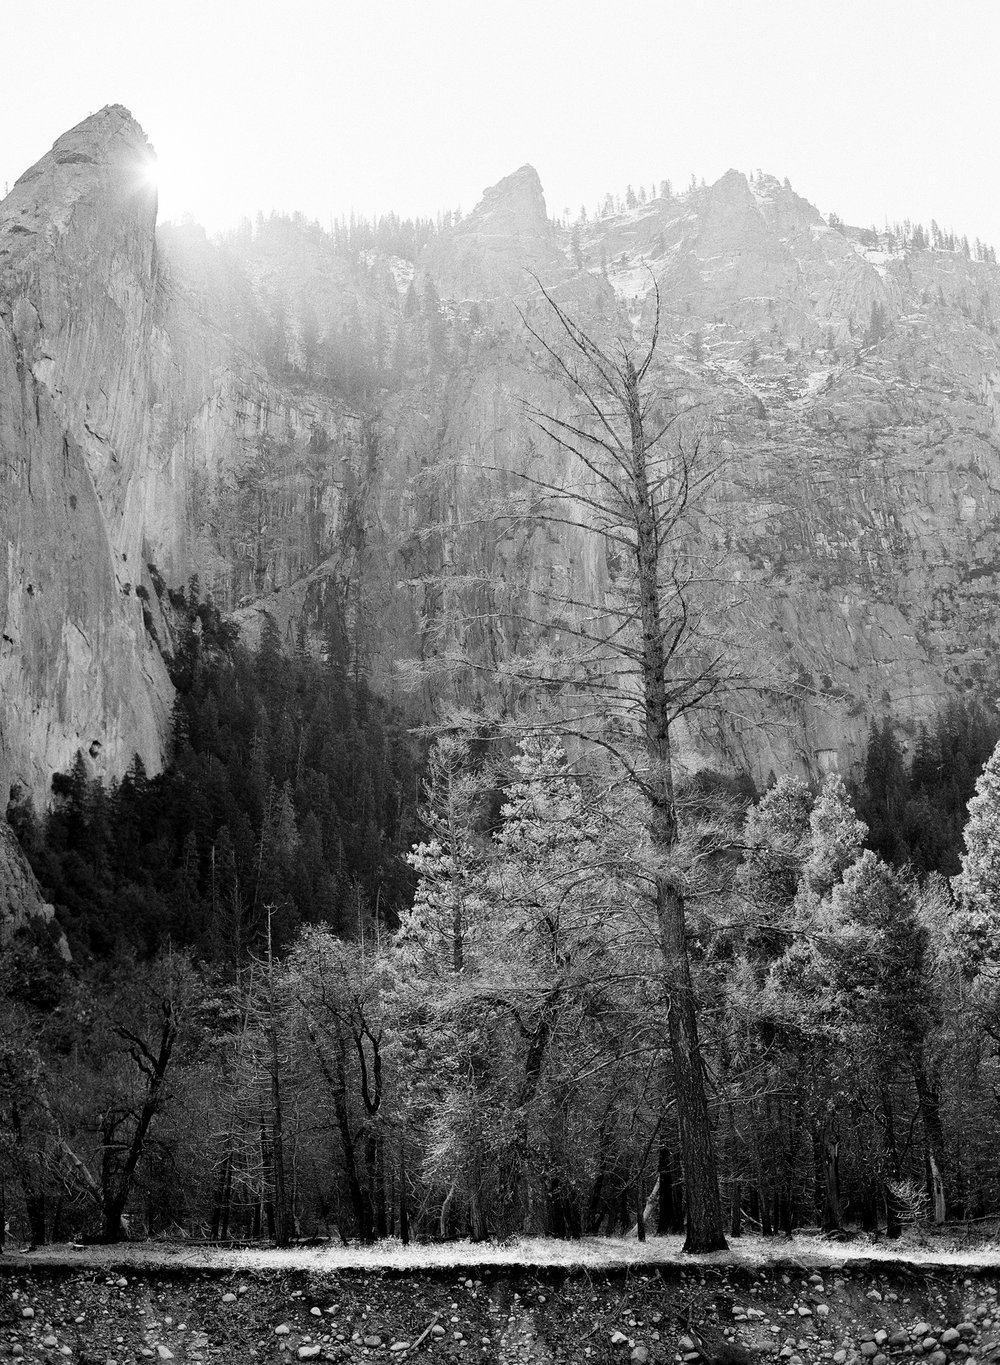 Leaning Tower and Tree, Yosemite Valley